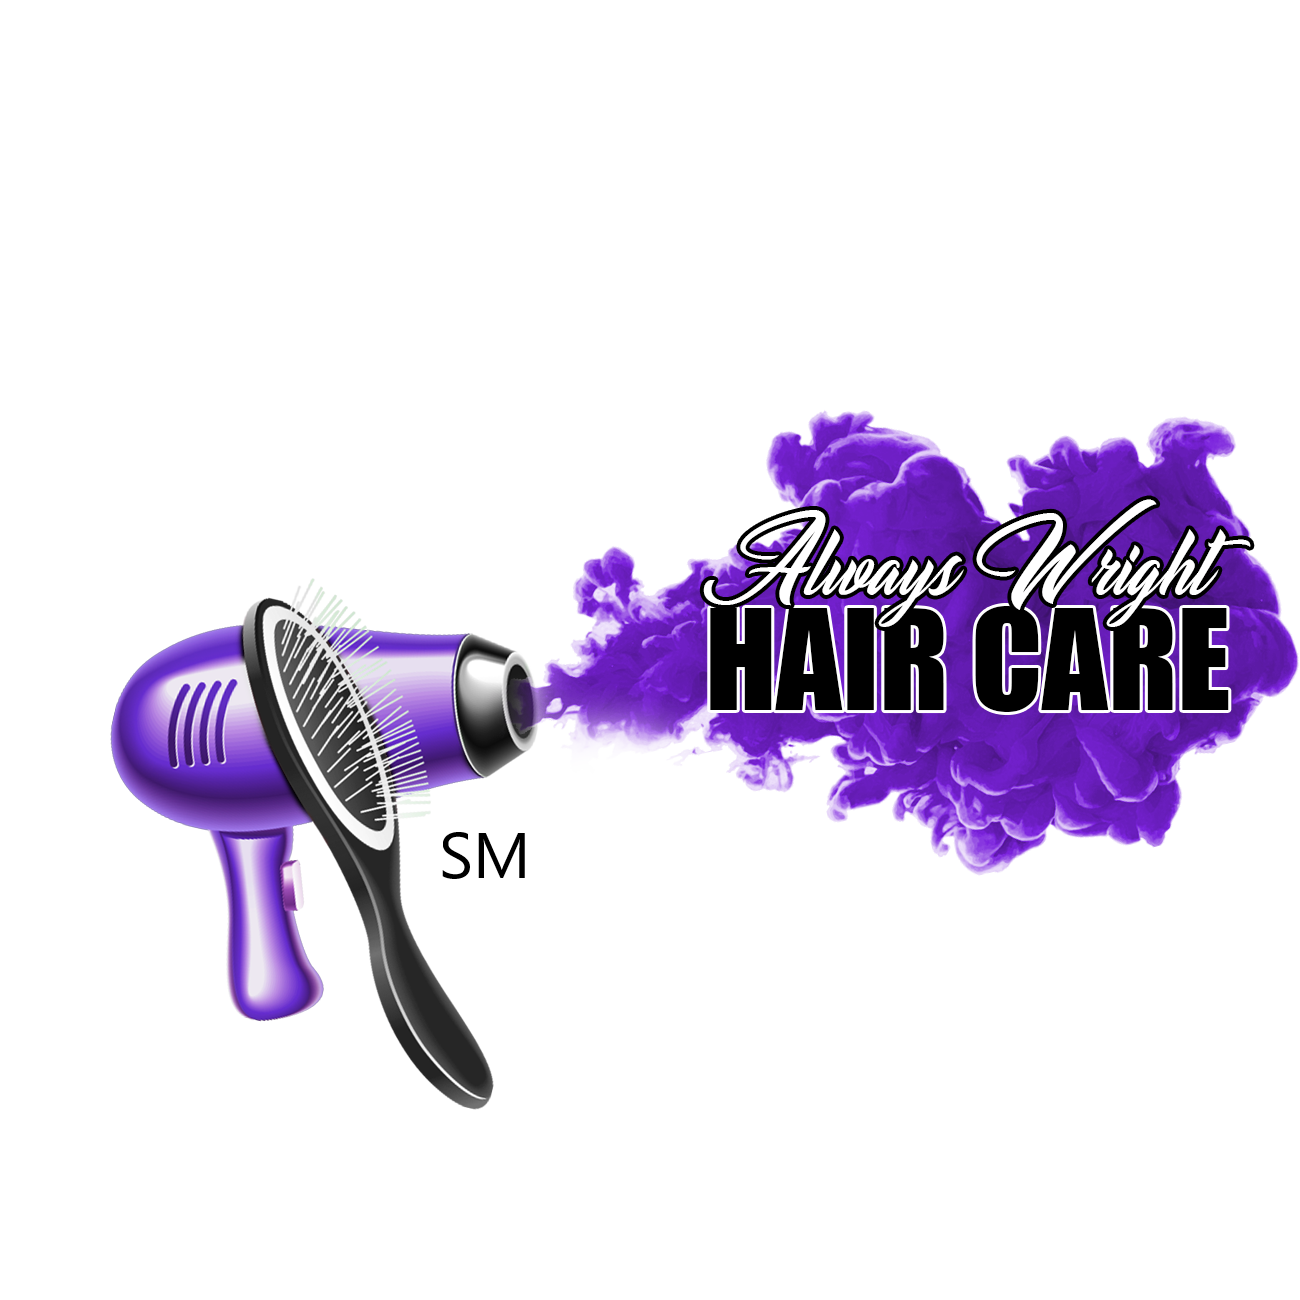 www.alwayswrighthaircare.com